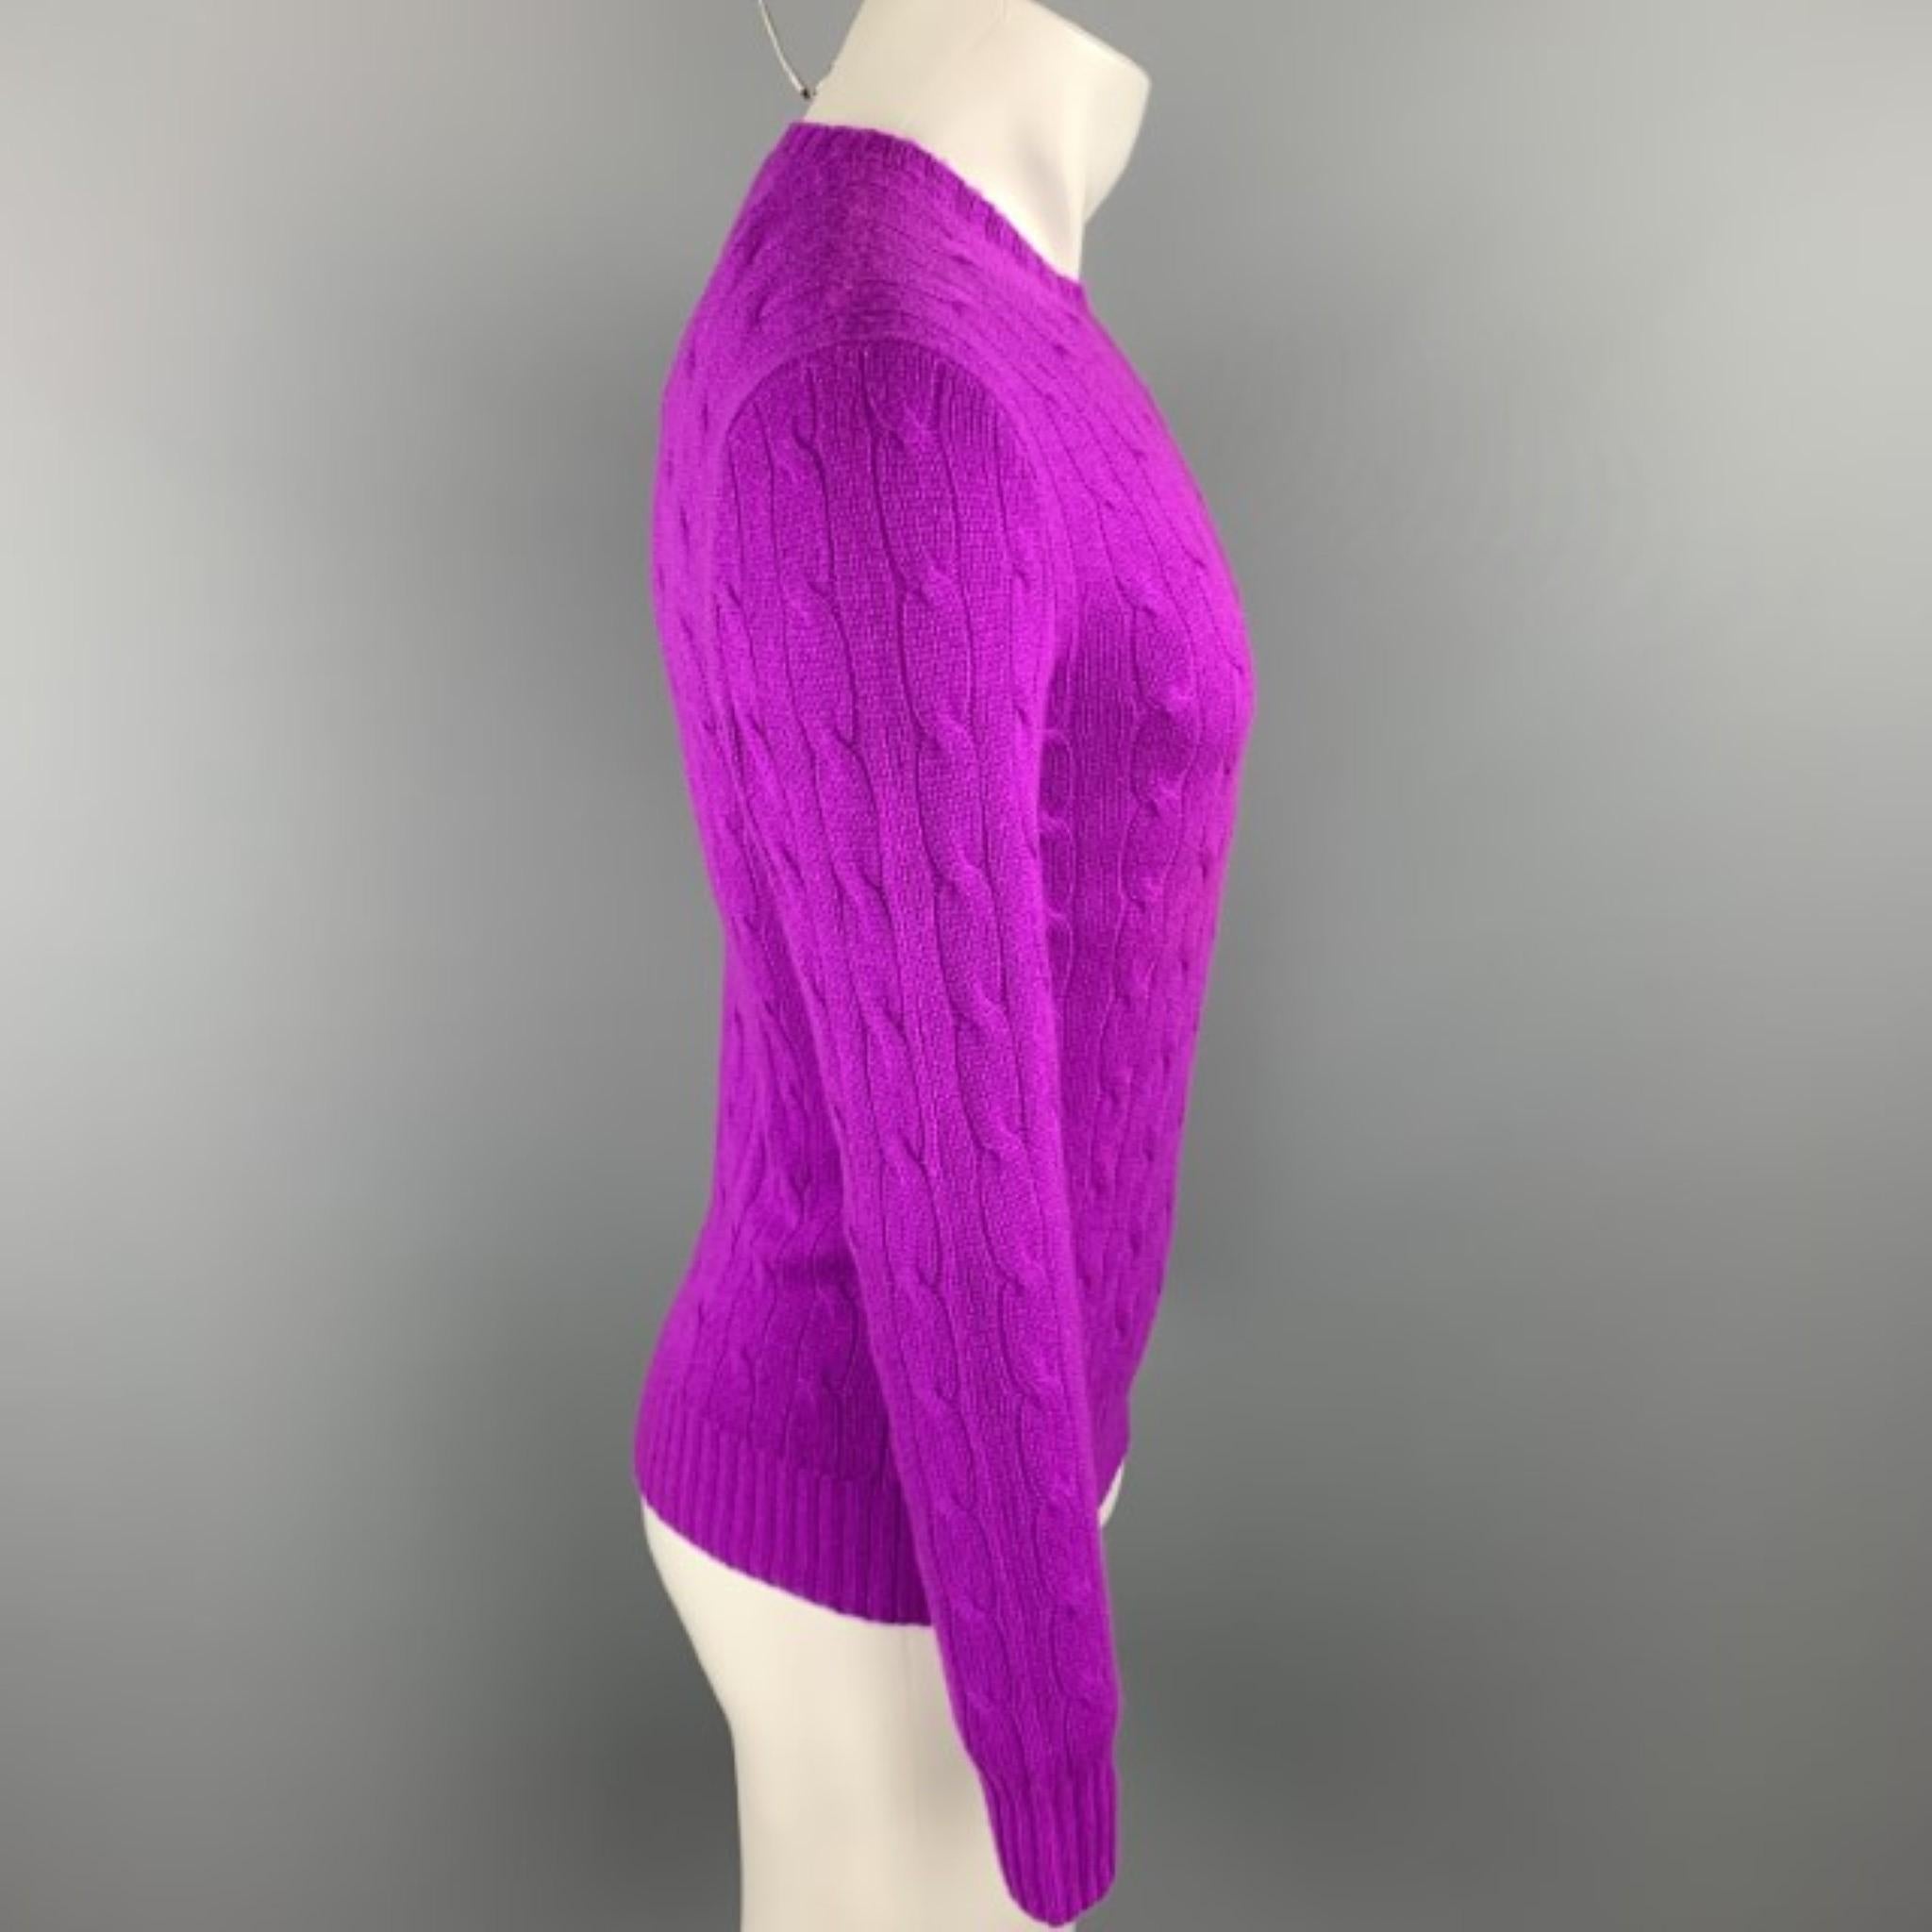 RALPH LAUREN sweater comes in a magenta cable knit cashmere featuring a crew-neck. 

New With Tags.
Marked: XS
Original Retail Price: $398.00

Measurements:

Shoulder: 18.5 in. 
Chest: 38 in. 
Sleeve: 25 in.
Length: 25 in. 